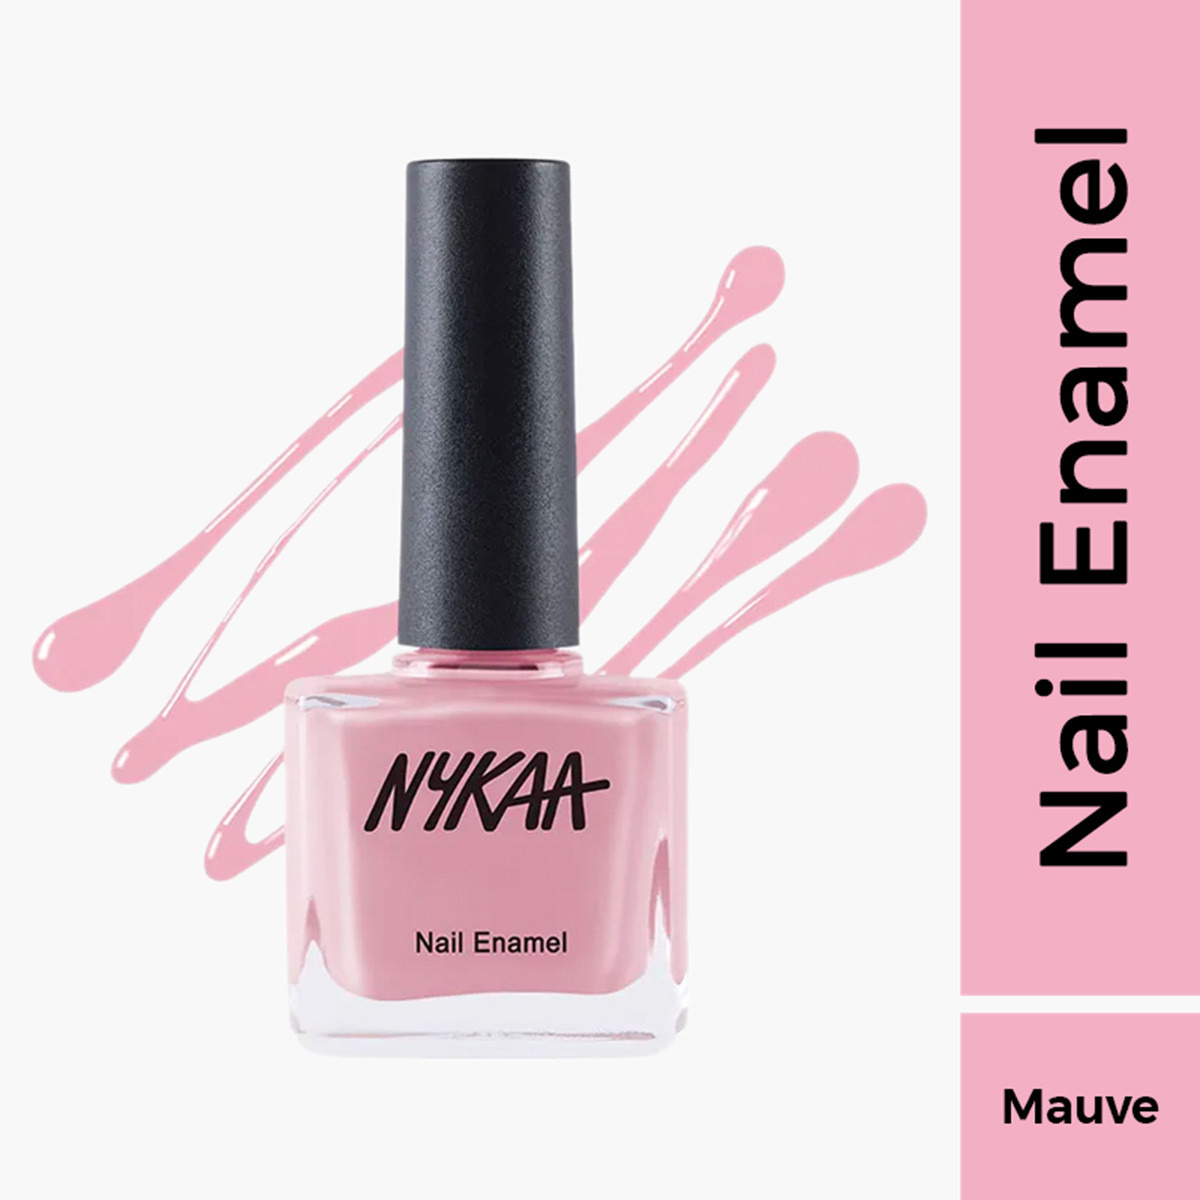 ❤ MAKEUP FOR ETERNITY ❤: Nykaa Nail Polish 63 Hawaaian Punch Review &  Swatches